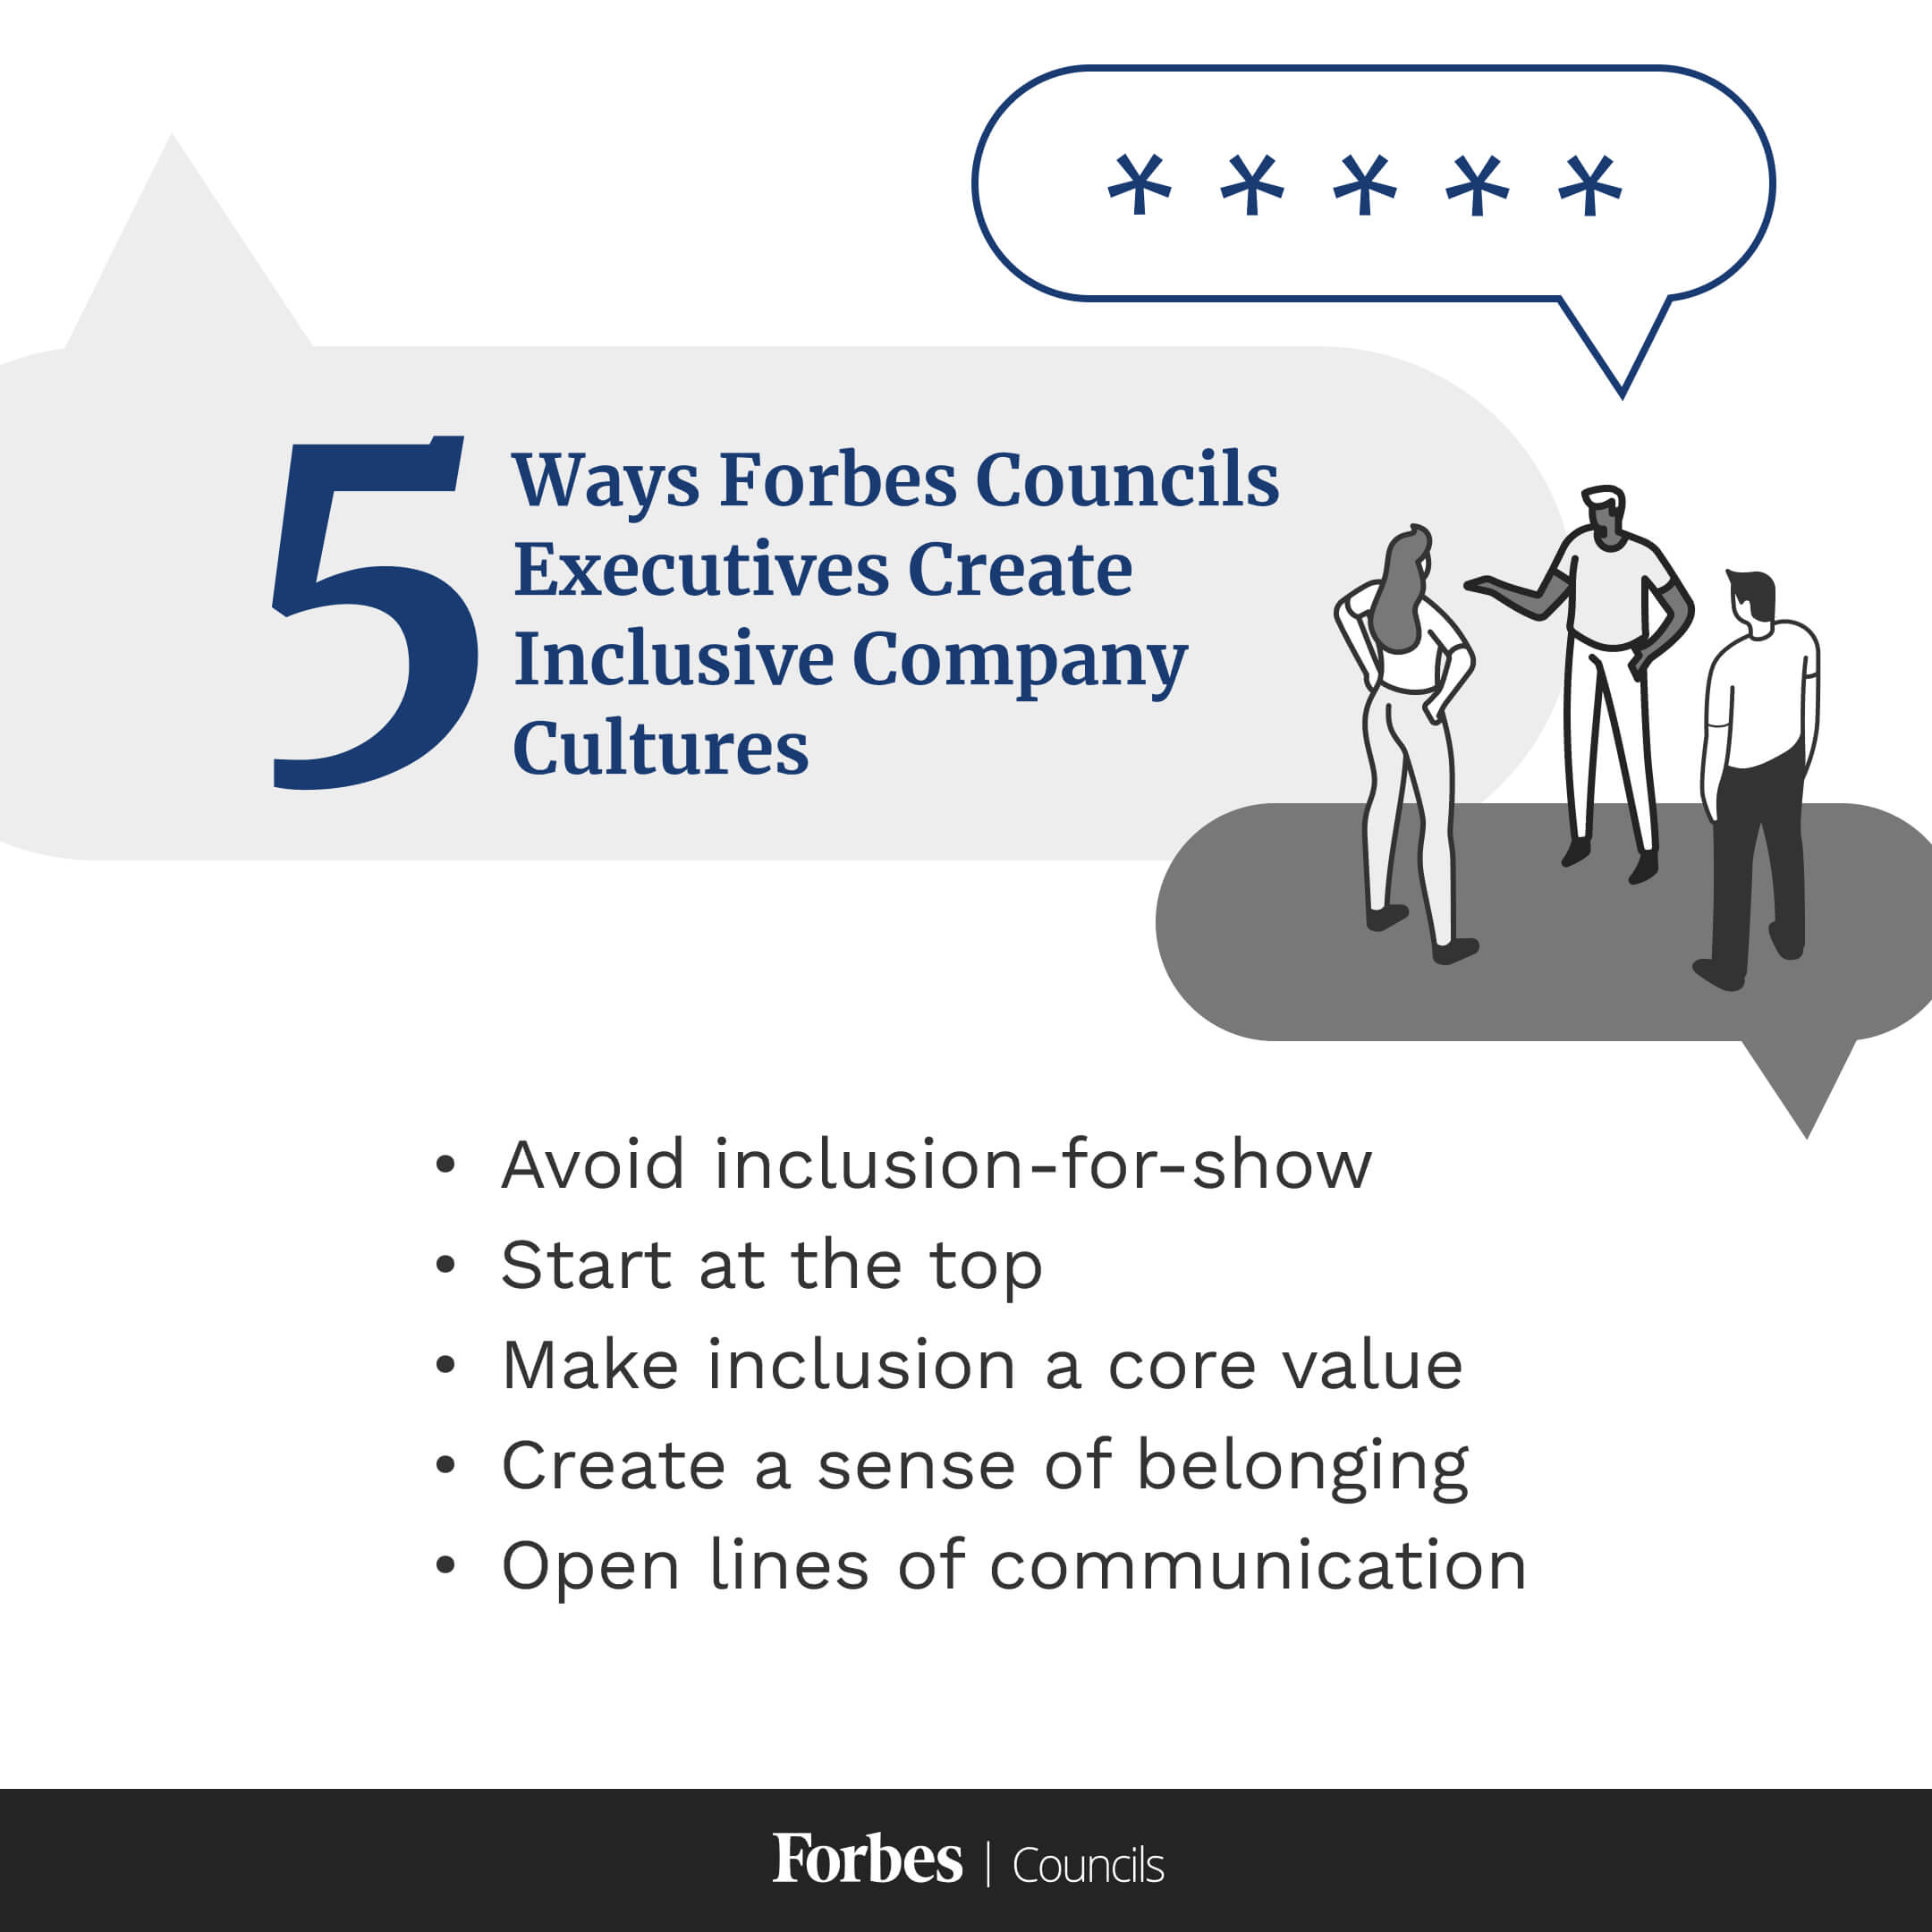 5-Ways-Forbes-Councils-Executives-Create-Inclusive-Company-Cultures